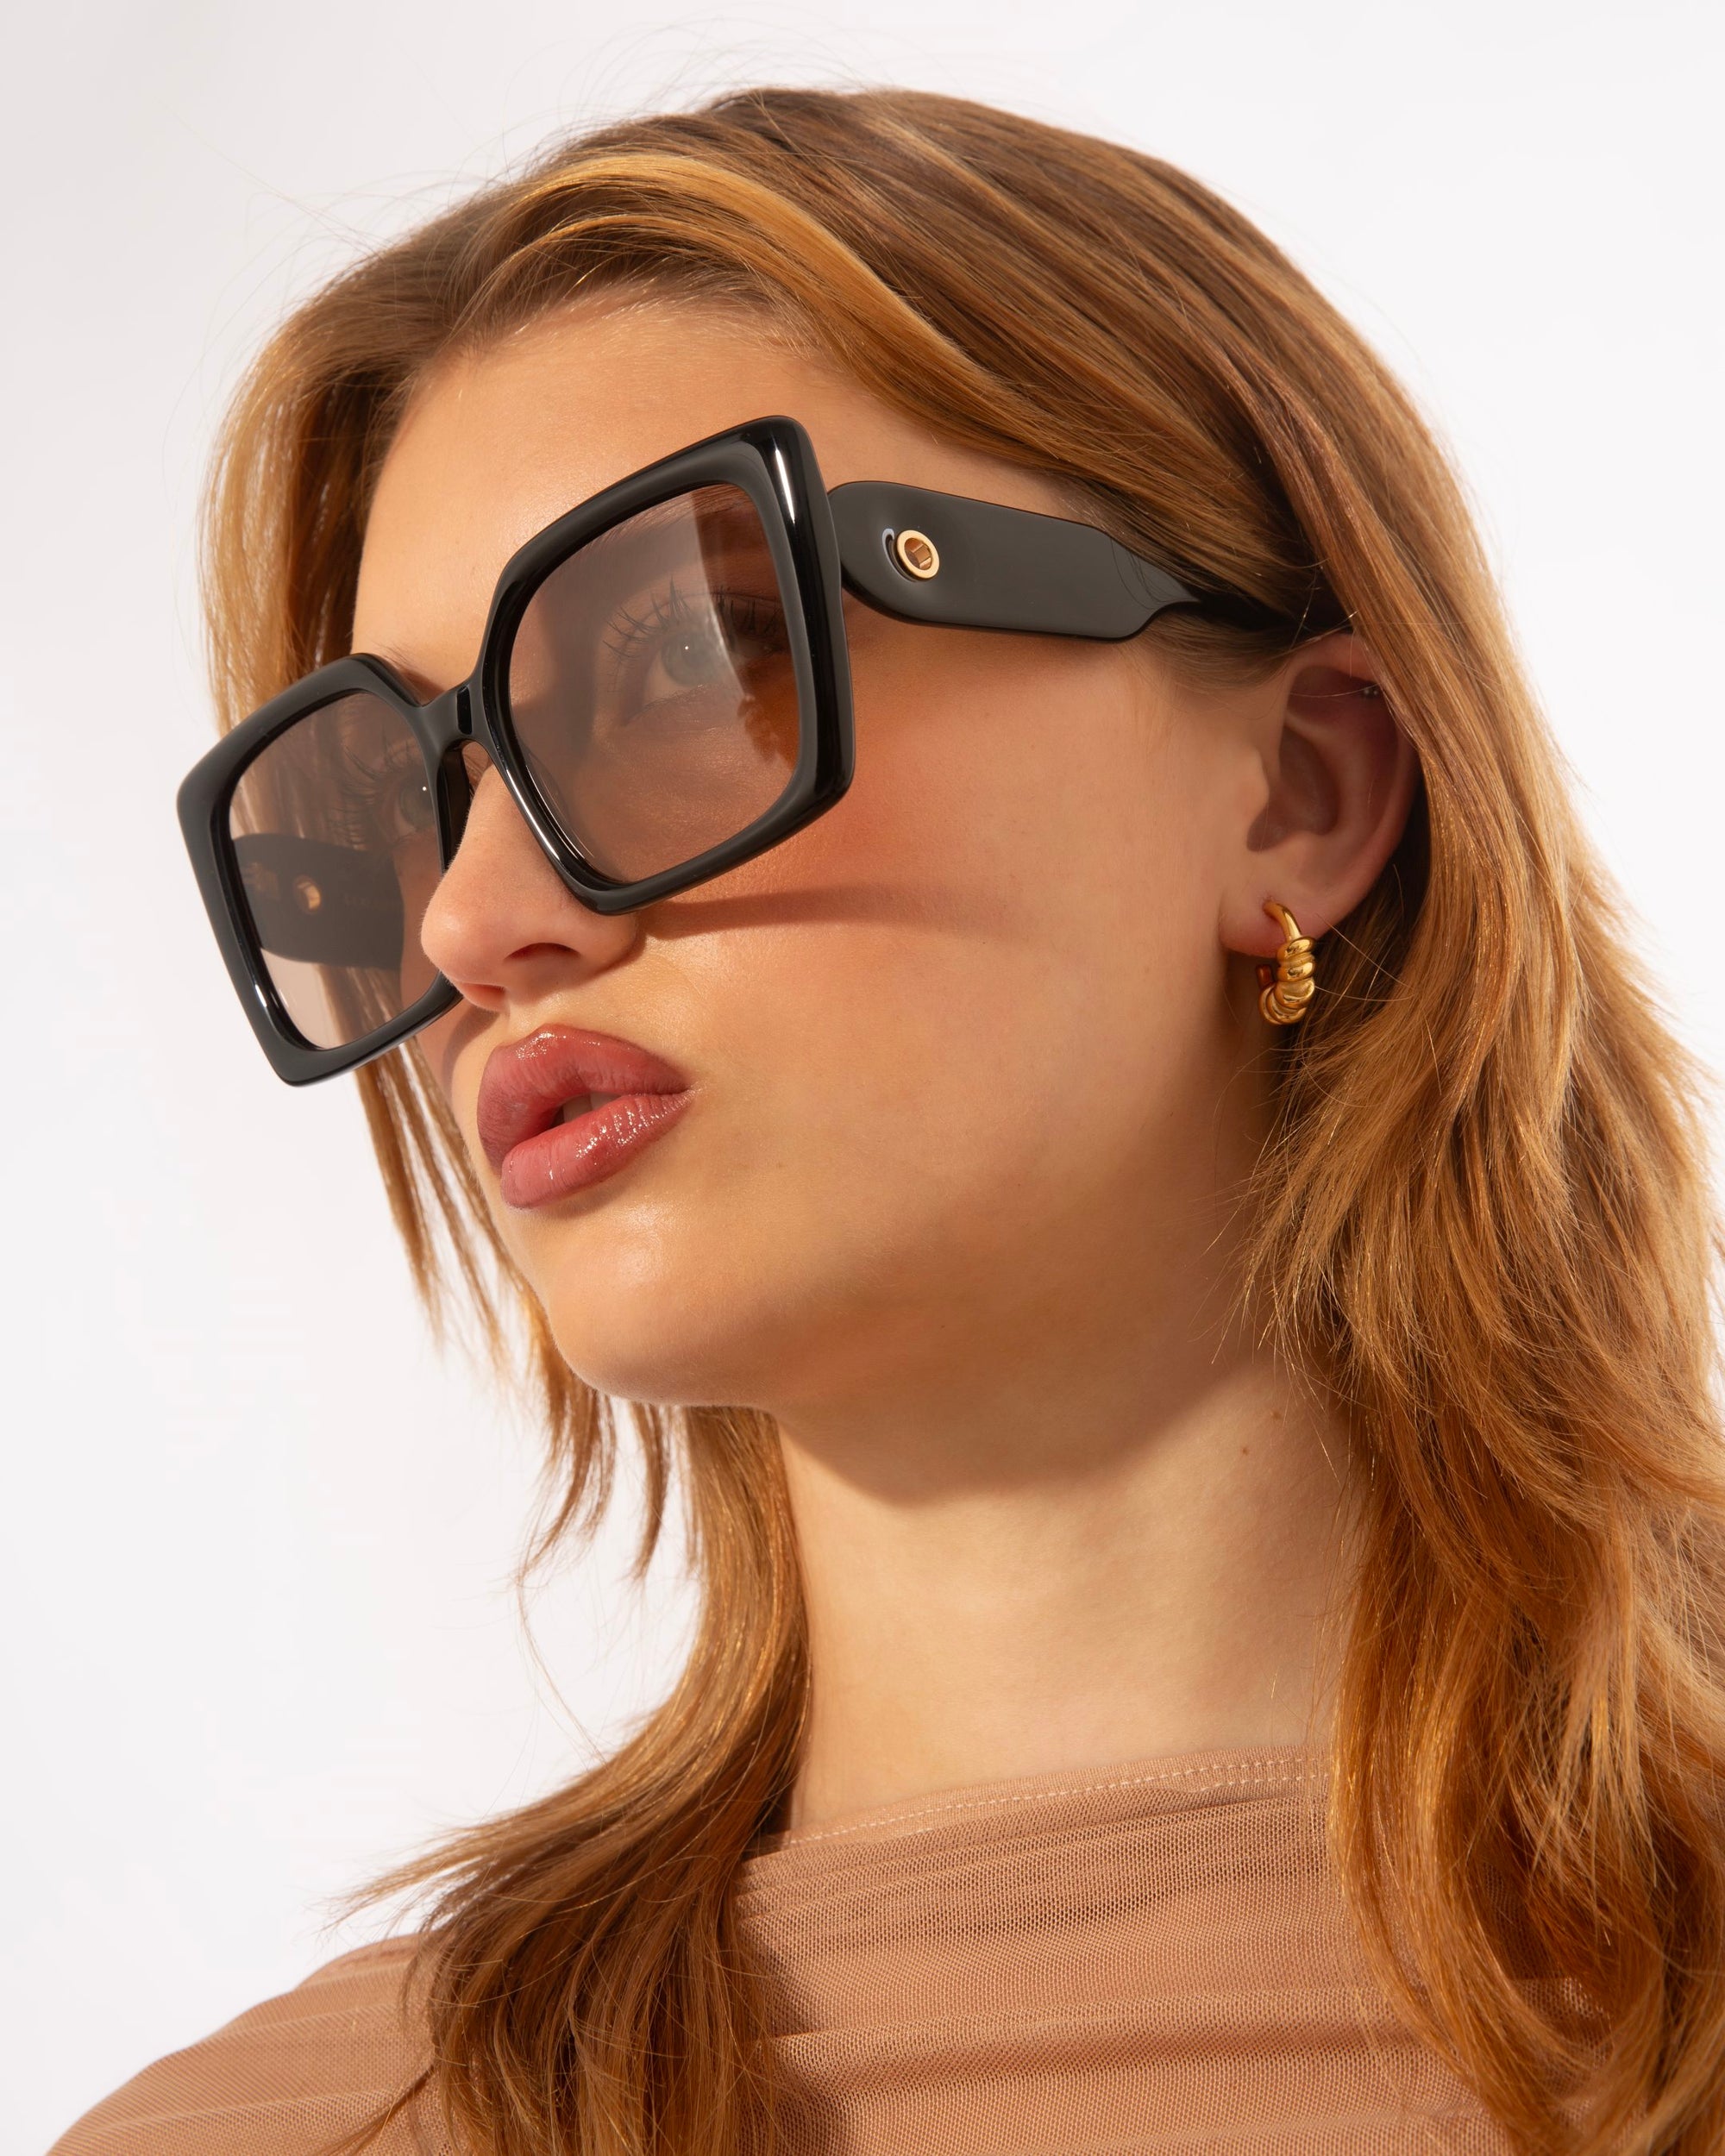 A person with reddish-brown hair wears oversized square Eos sunglasses by For Art&#39;s Sake® and gold hoop earrings. They are dressed in a light brown top. The background is a clean, light color, highlighting the stylish accessories and hair.